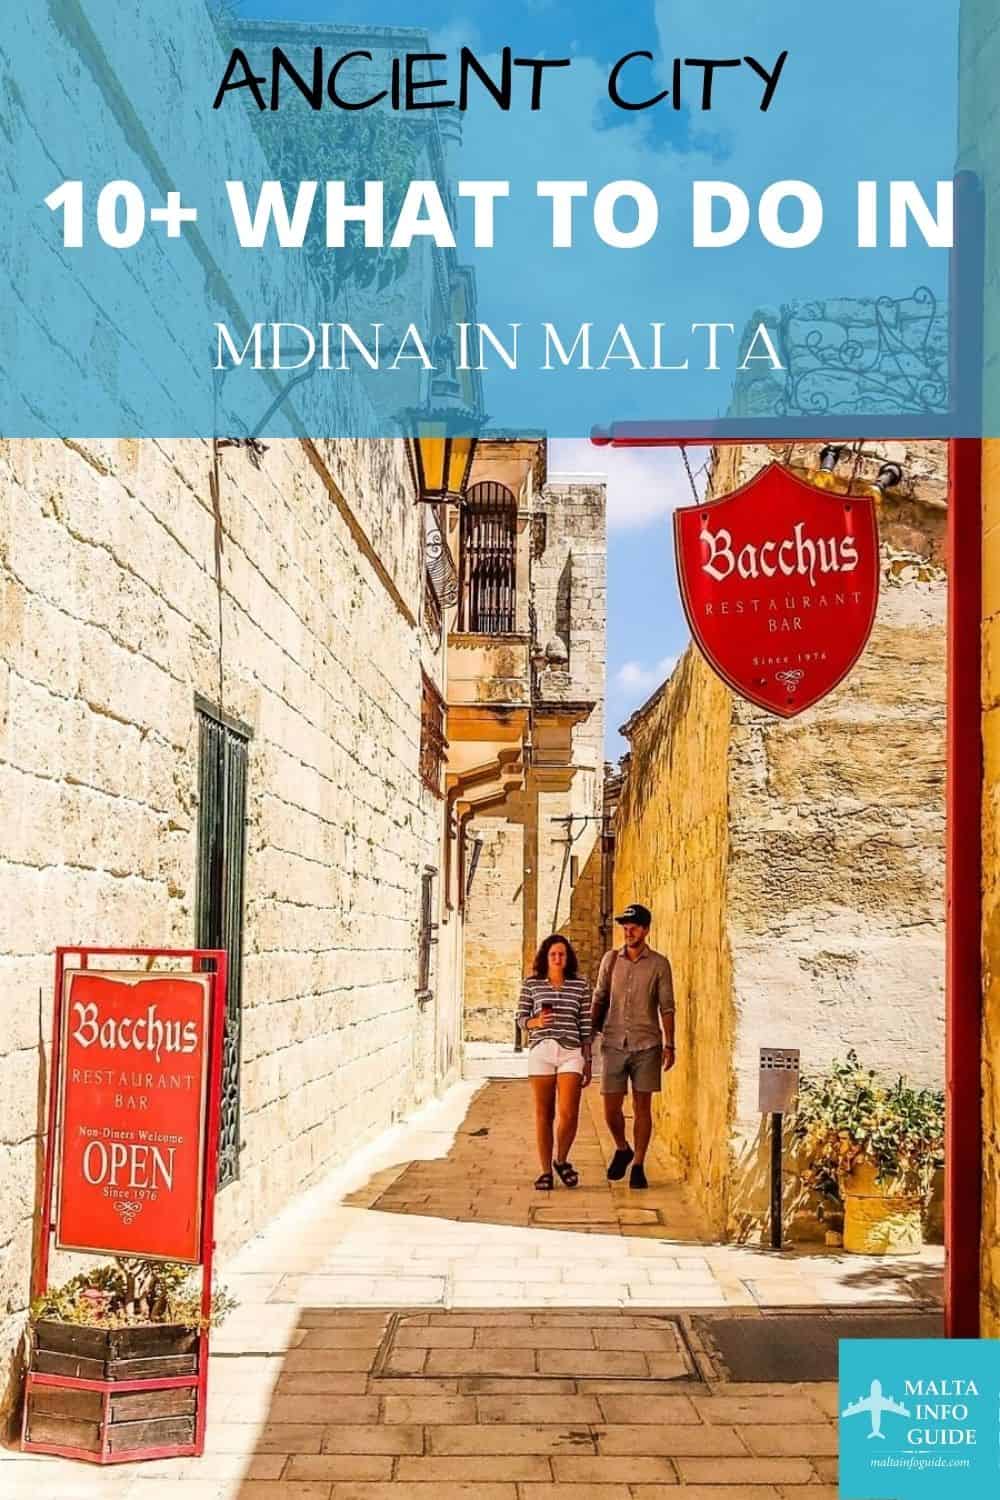 Here are the top things to do in Mdina the silent city of Malta. Use this guide as a helpful hand in what to do in Mdina.